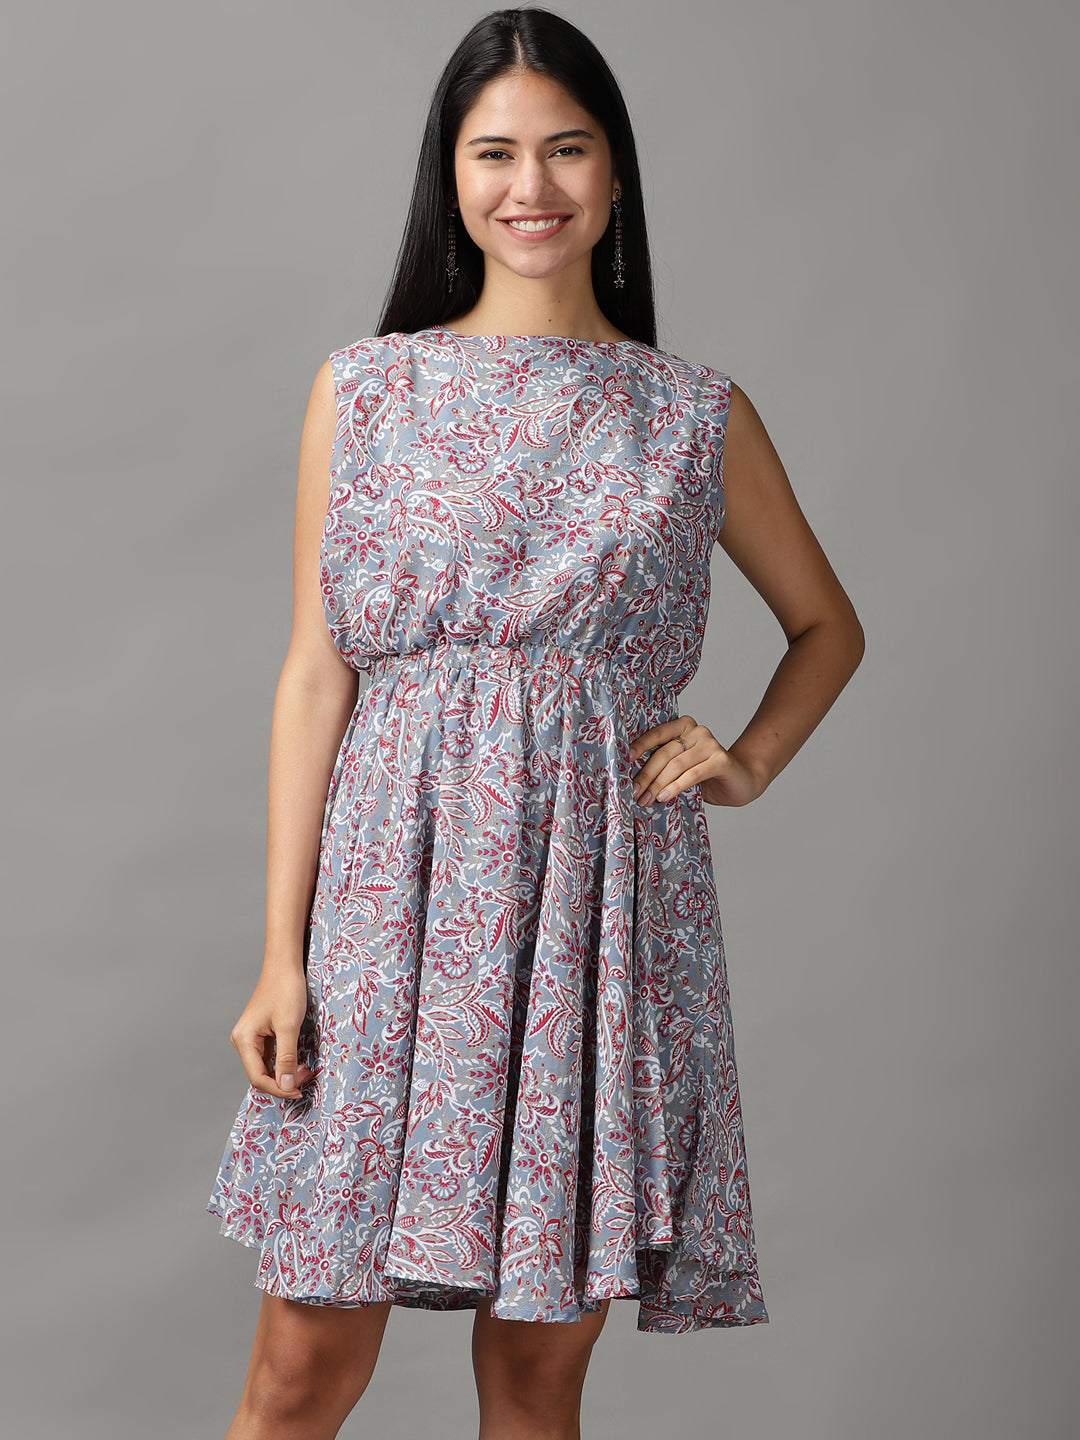 Women's Blue Aztec Fit and Flare Dress